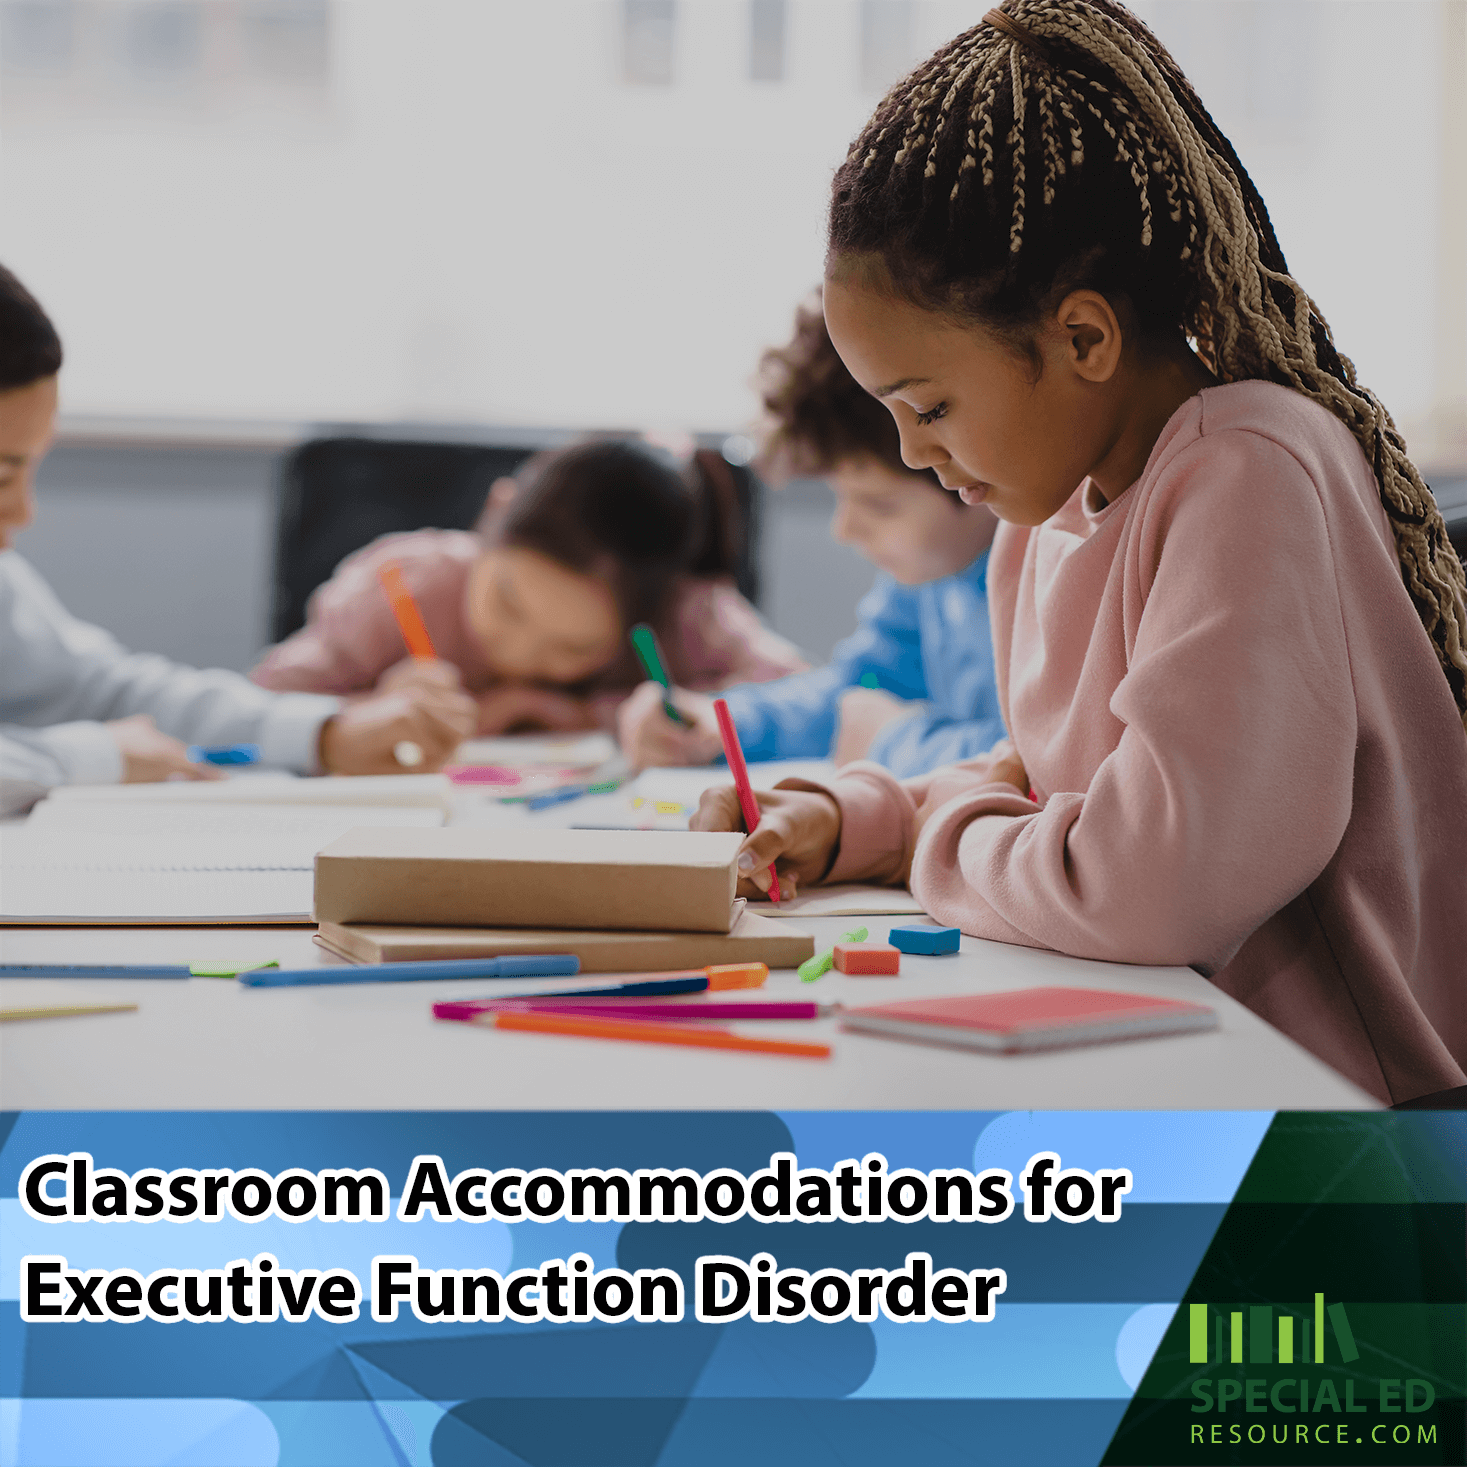 This image shows a classroom setting with diverse young students engaged in various activities at their desks. A young girl with braided hair in the foreground is focused on drawing with crayons, while other children around her are either writing or coloring. The text overlay at the top reads "Classroom Accommodations for Executive Function Disorder" with the website logo "SpecialEdResource.com " at the bottom.